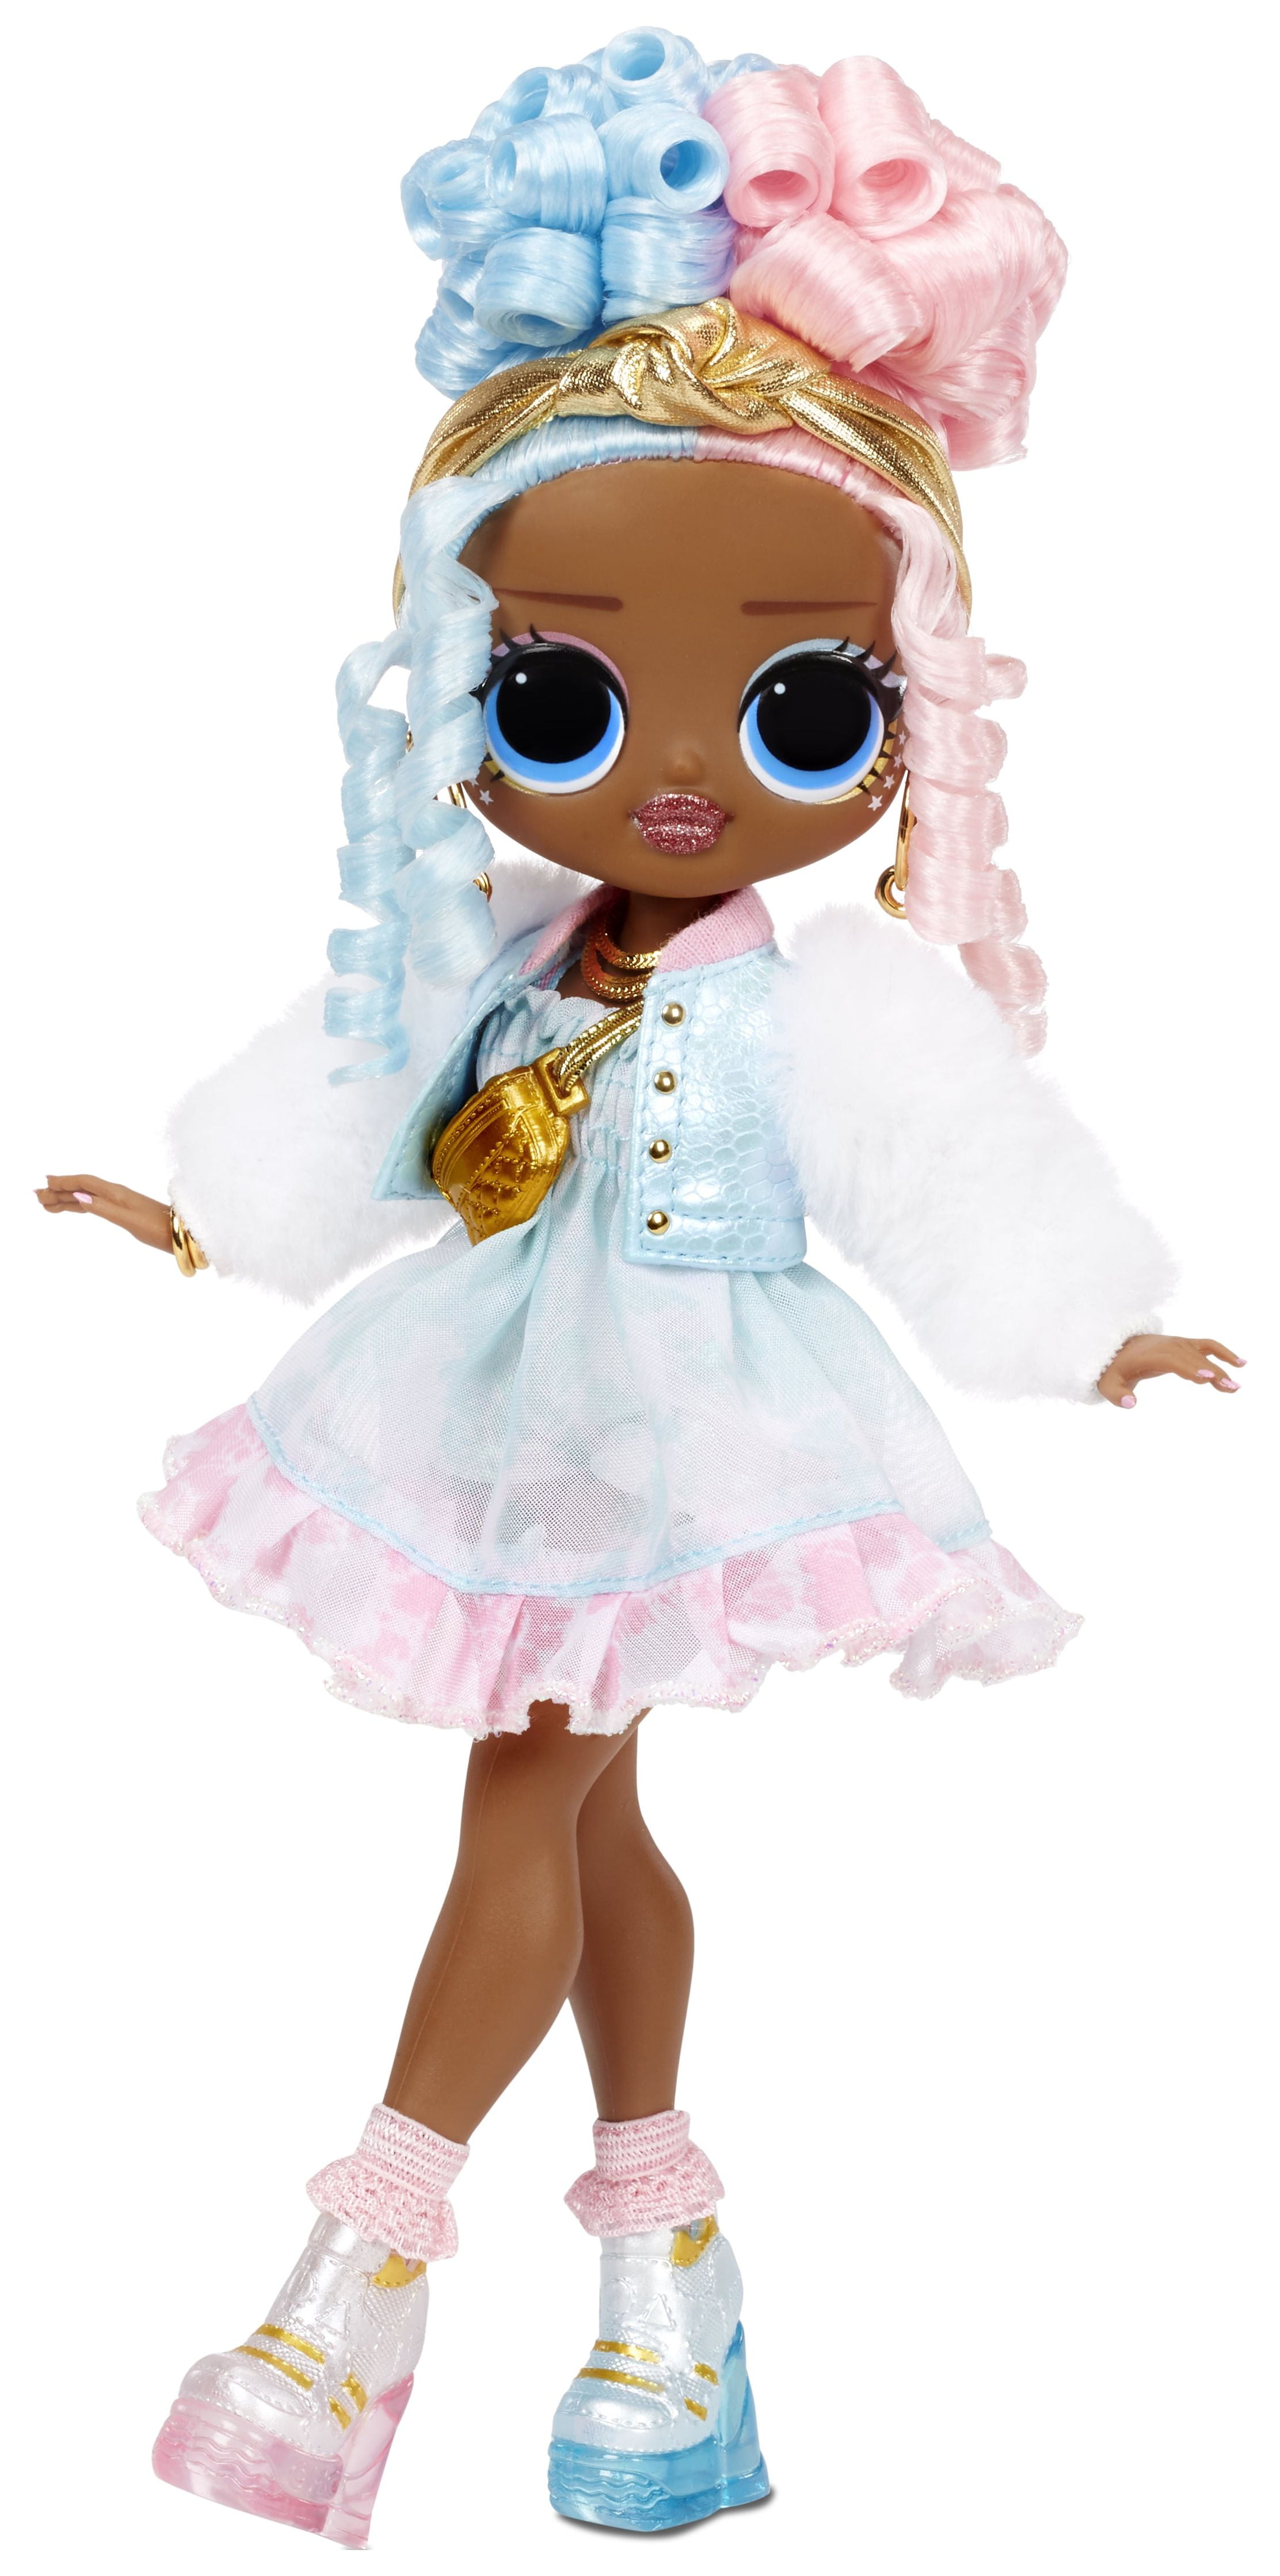 LOL Surprise OMG Sweets Fashion Doll - Dress Up Doll Set With 20 Surprises  for Girls and Kids 4+ 